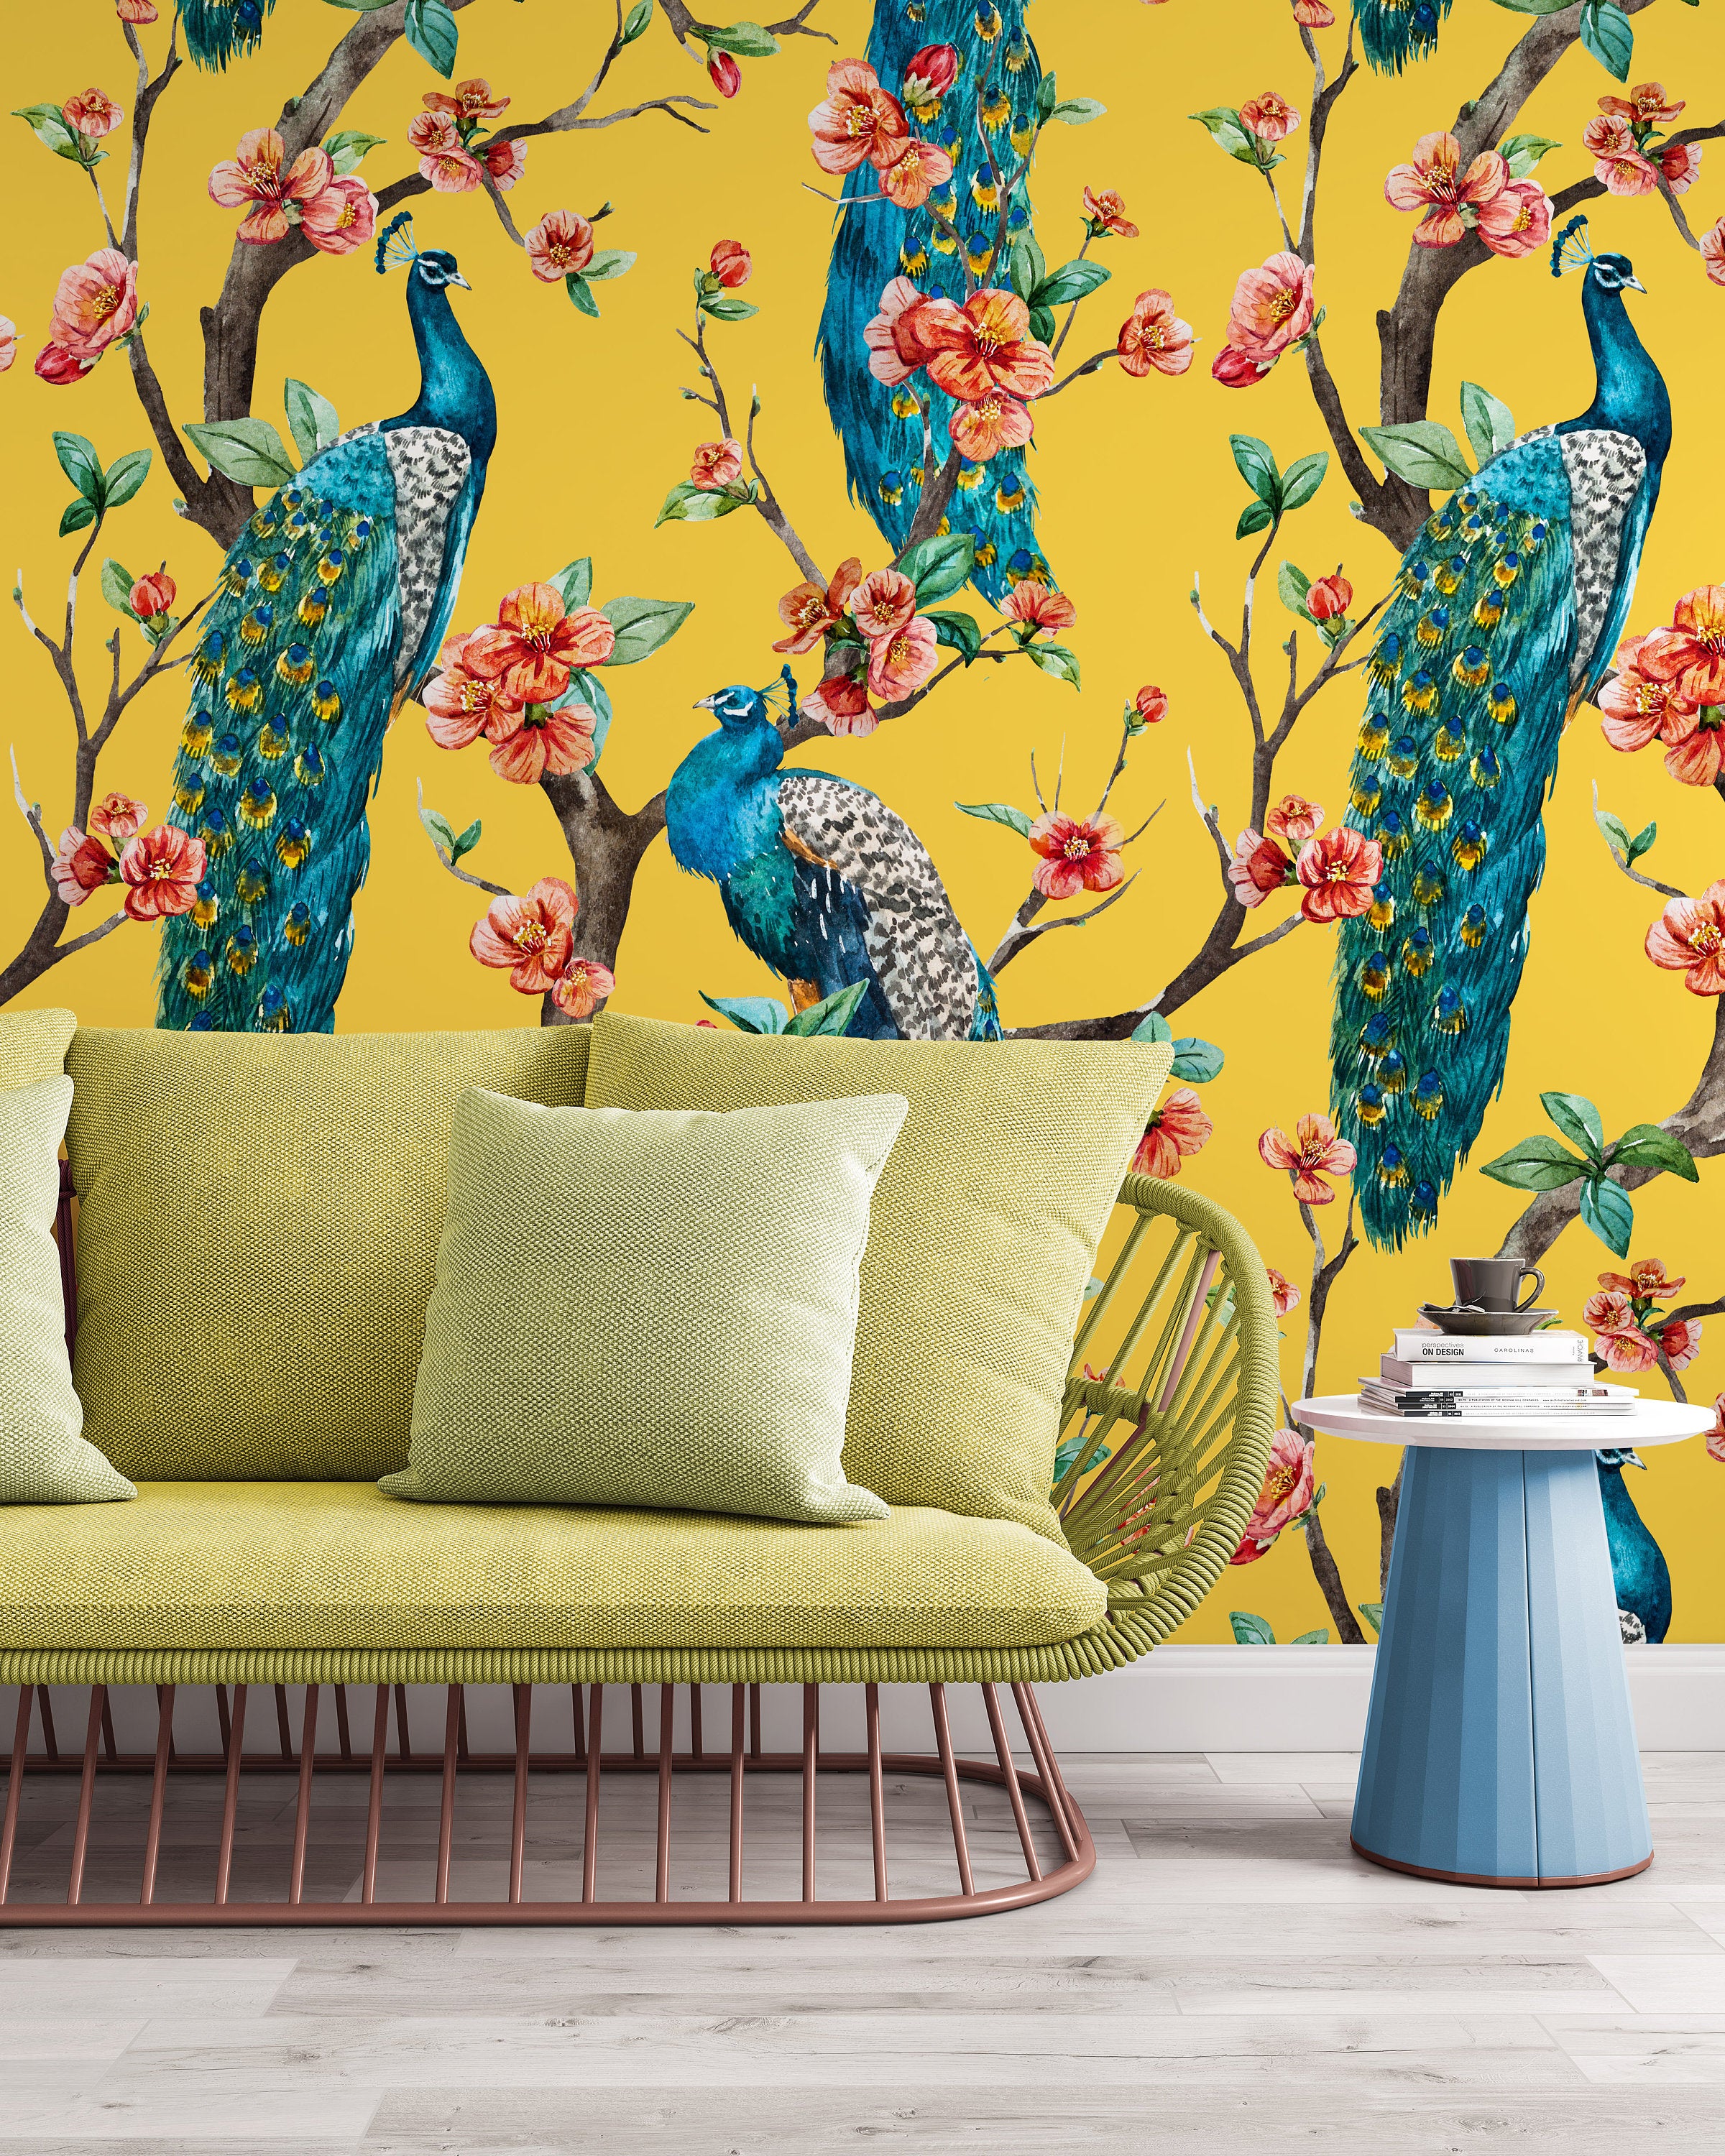 Watercolor Peacock on the Tree Cherry Wallpaper Self Adhesive Peel & Stick Wall Sticker Wall Decoration Scandinavian Design Removable